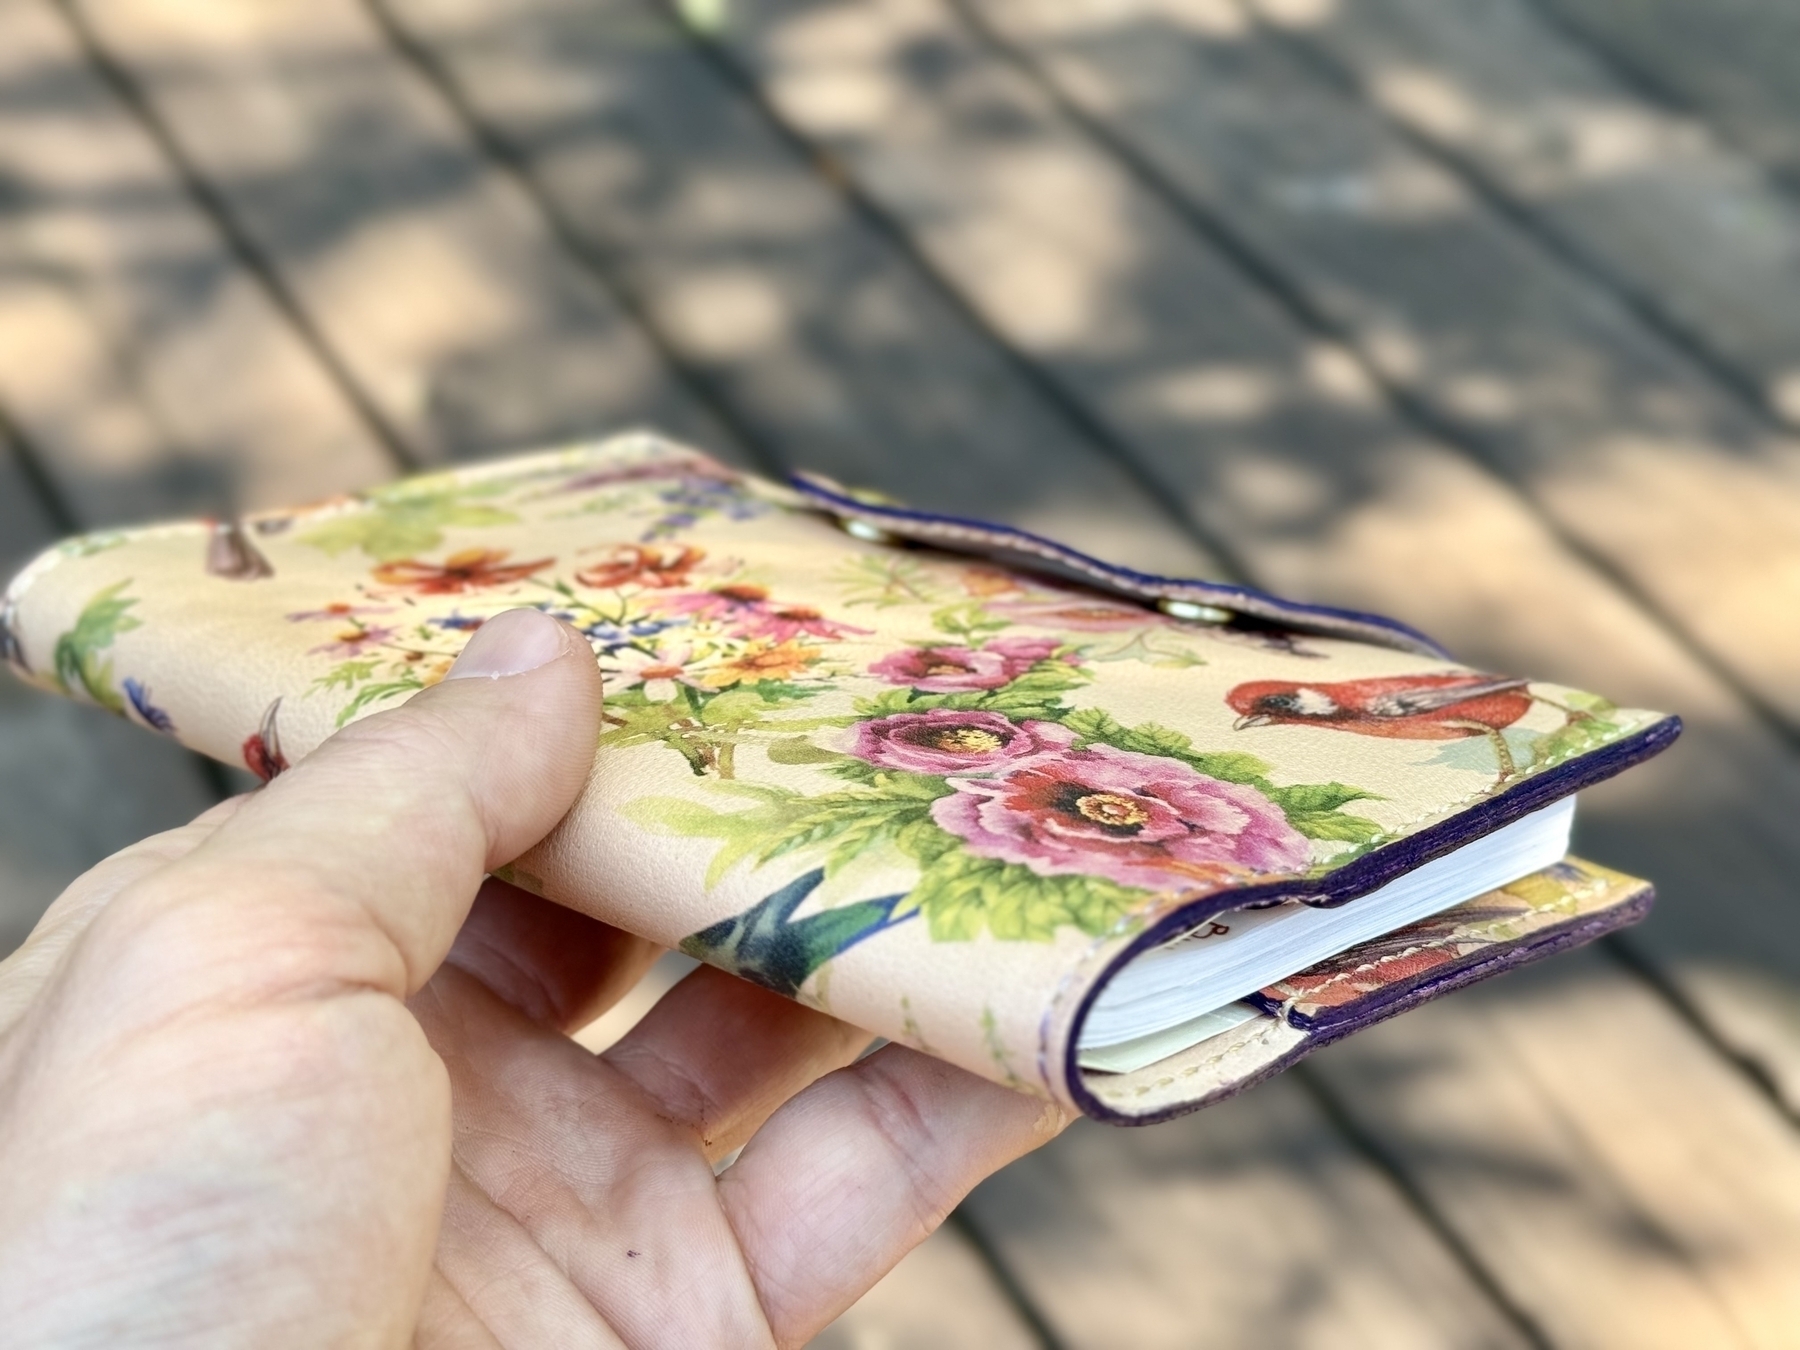 A hand is holding a small book or notebook with a floral and bird design on its cover.